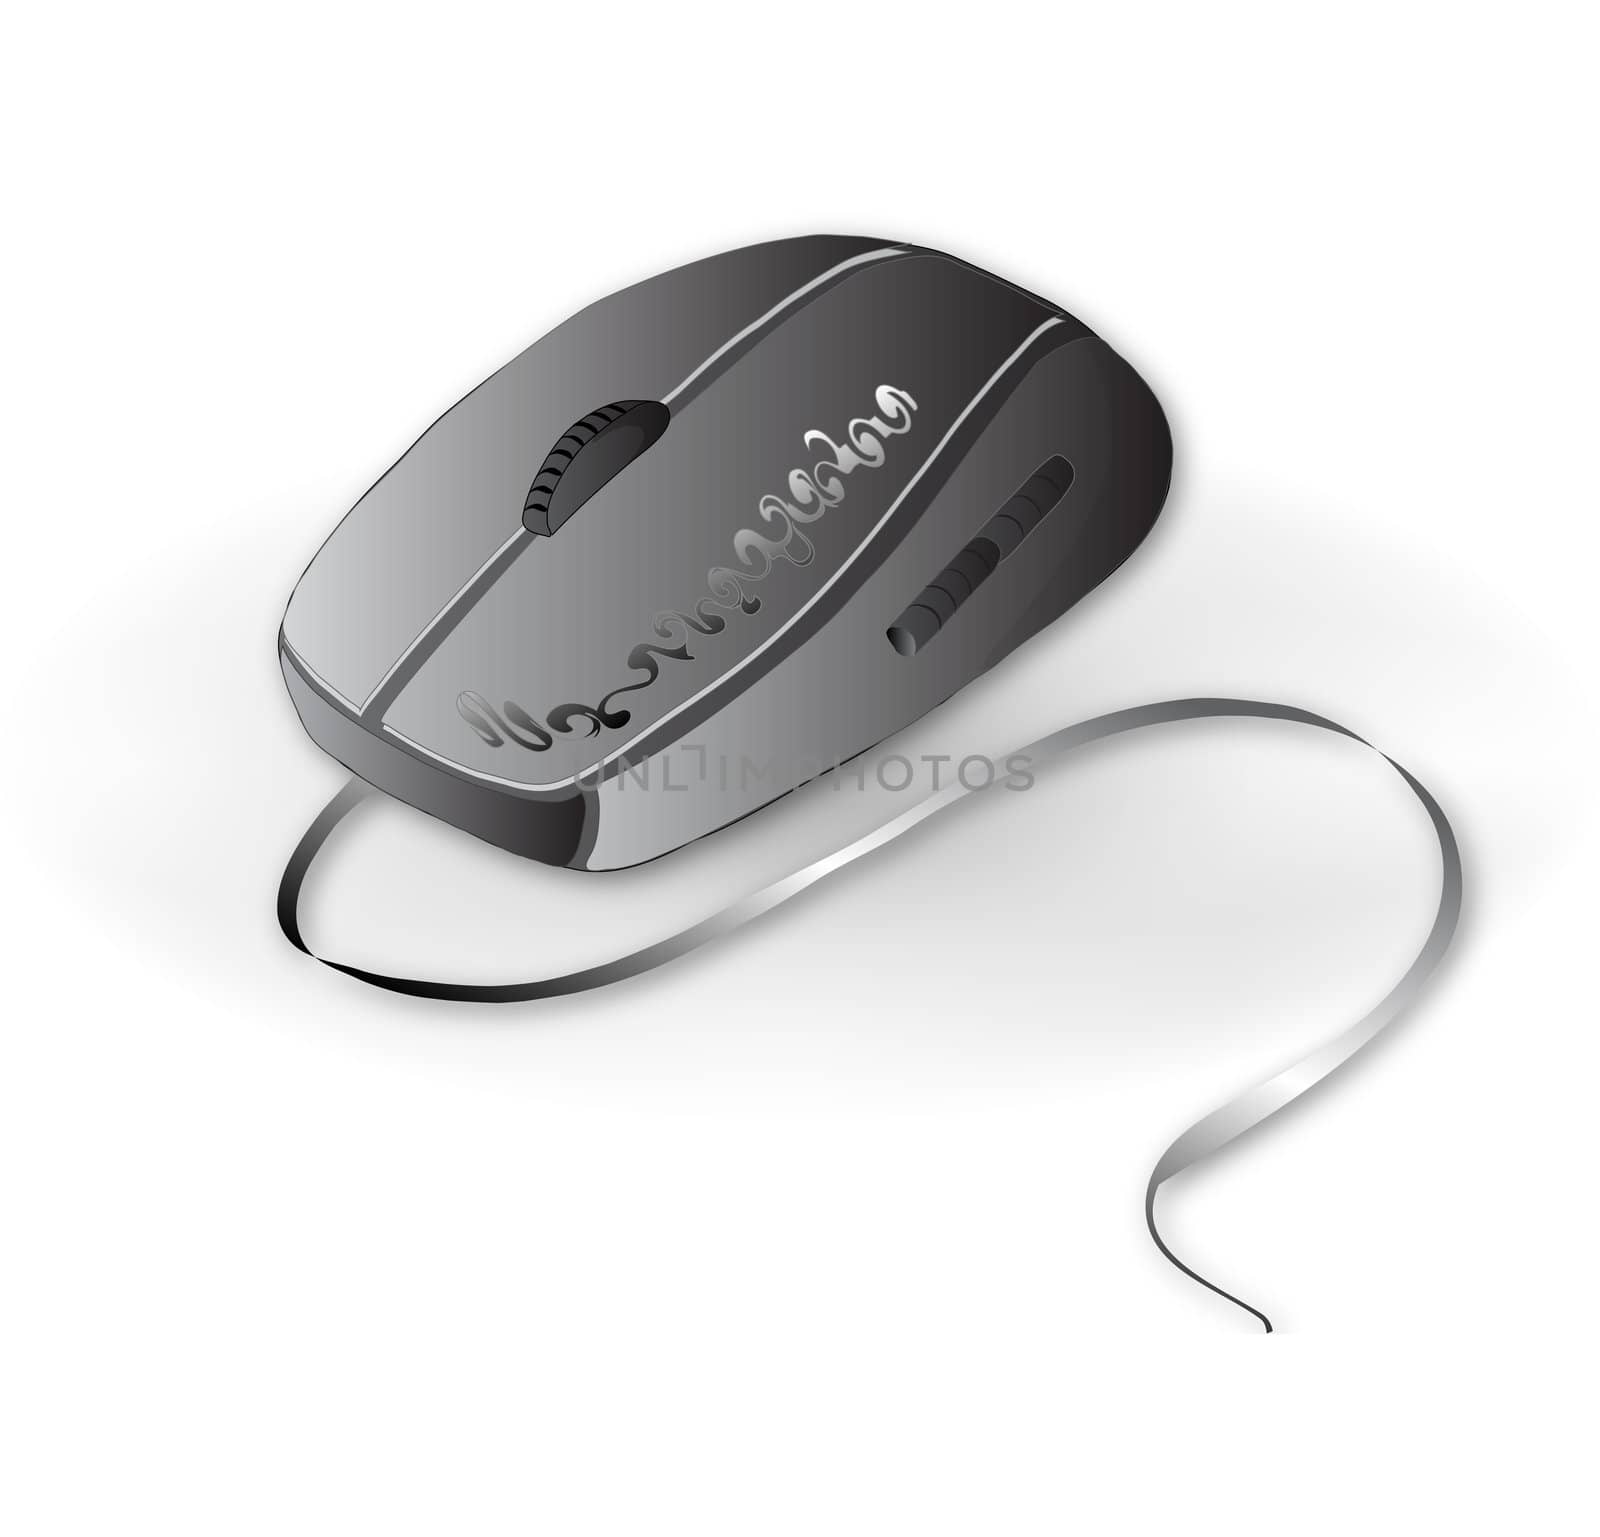 computer mouse is shaped like an ordinary